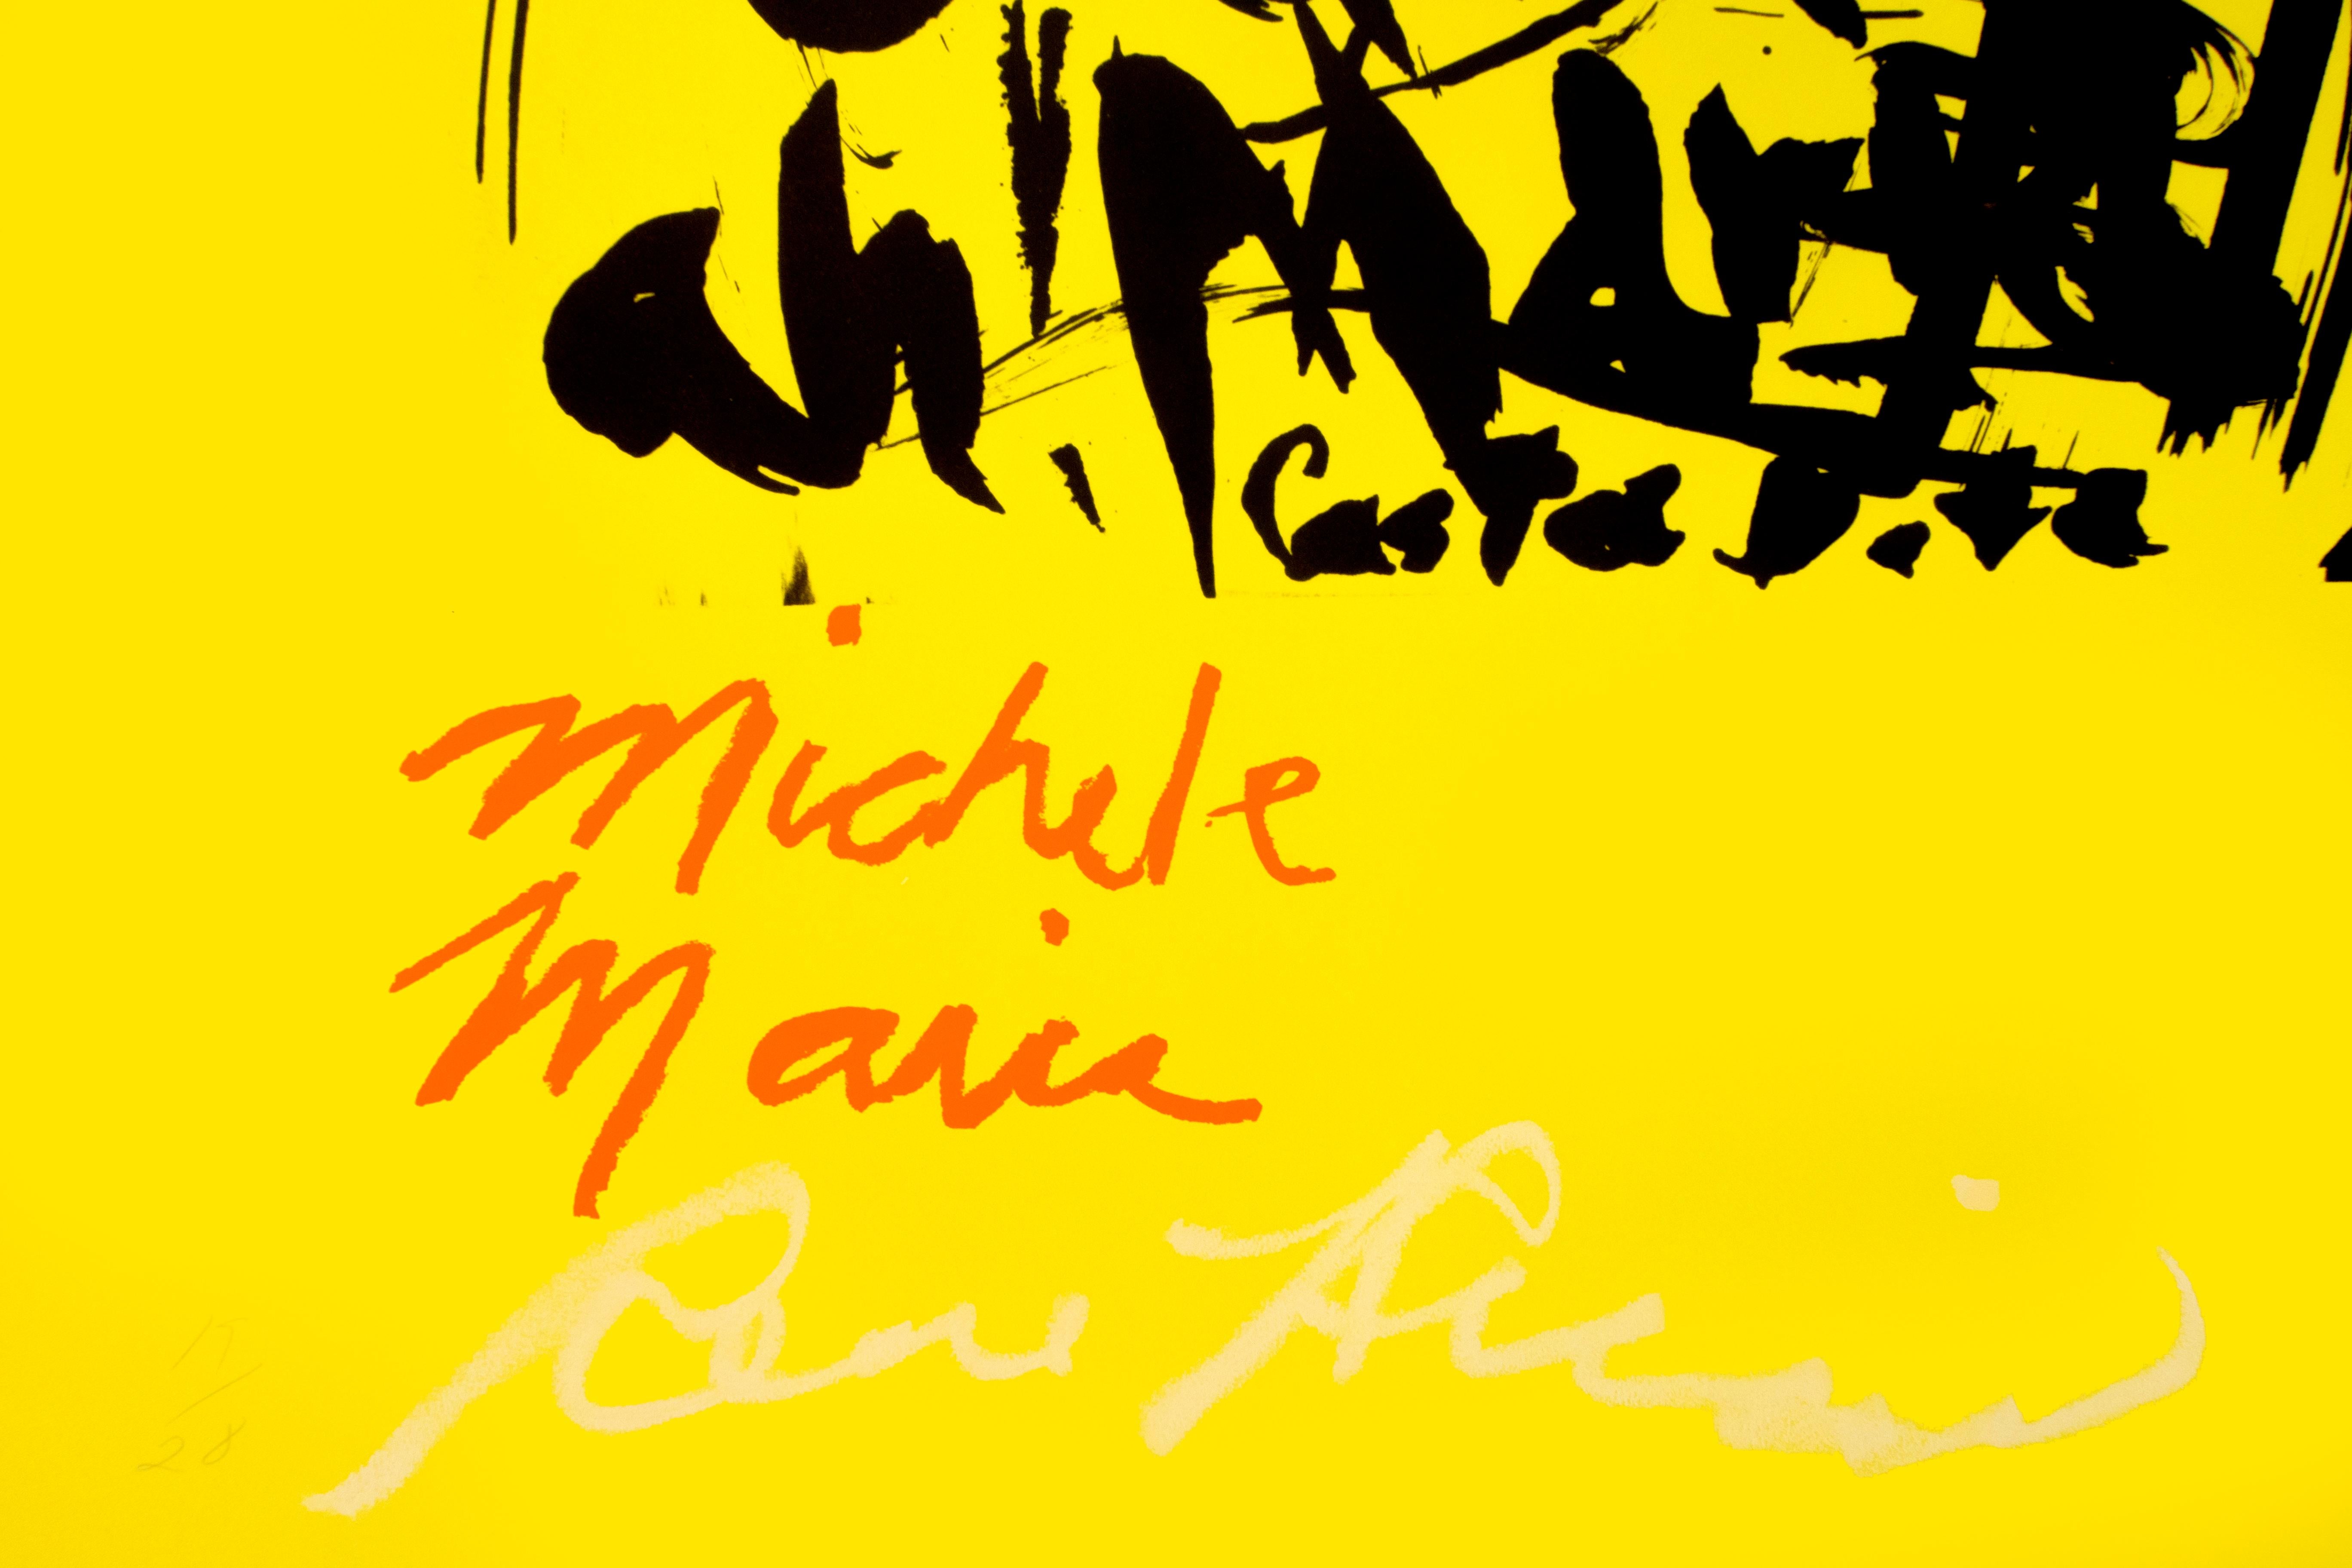 Touched by the influence of Andy Warhol, champion of a young Jean-Michel Basquiat, Rene Ricard served as enfant terrible of the 1980s New York art scene. In this bright yellow, red, and black portrait print of opera singer Marie Callas and artist